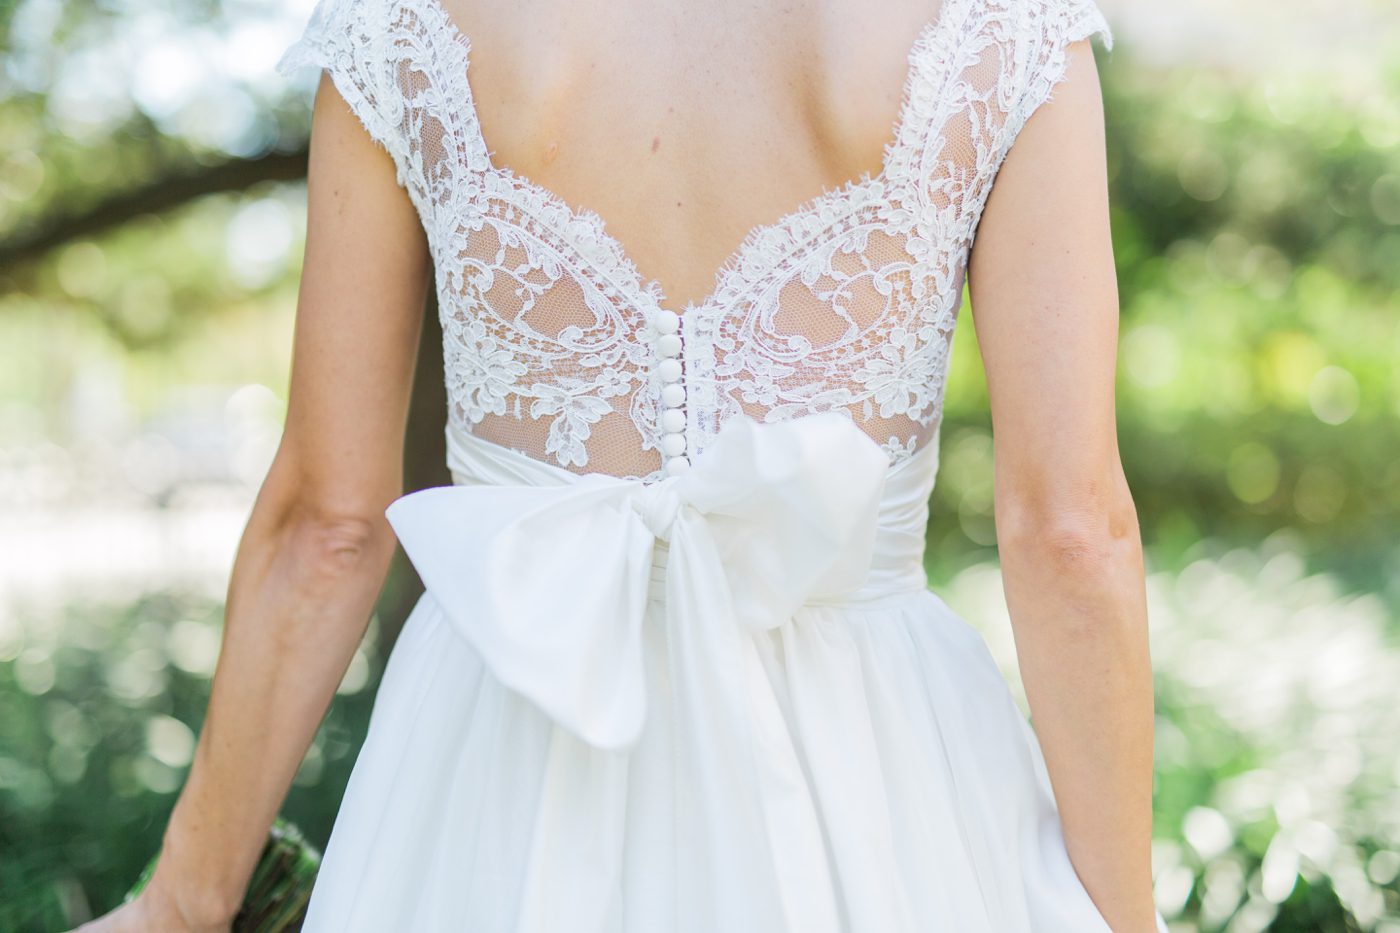 Lace wedding dress back with bow for a southern wedding in Charleston SC | Elegant William Aiken House Wedding Photos | Charleston SC wedding photographers Catherine Ann Photography